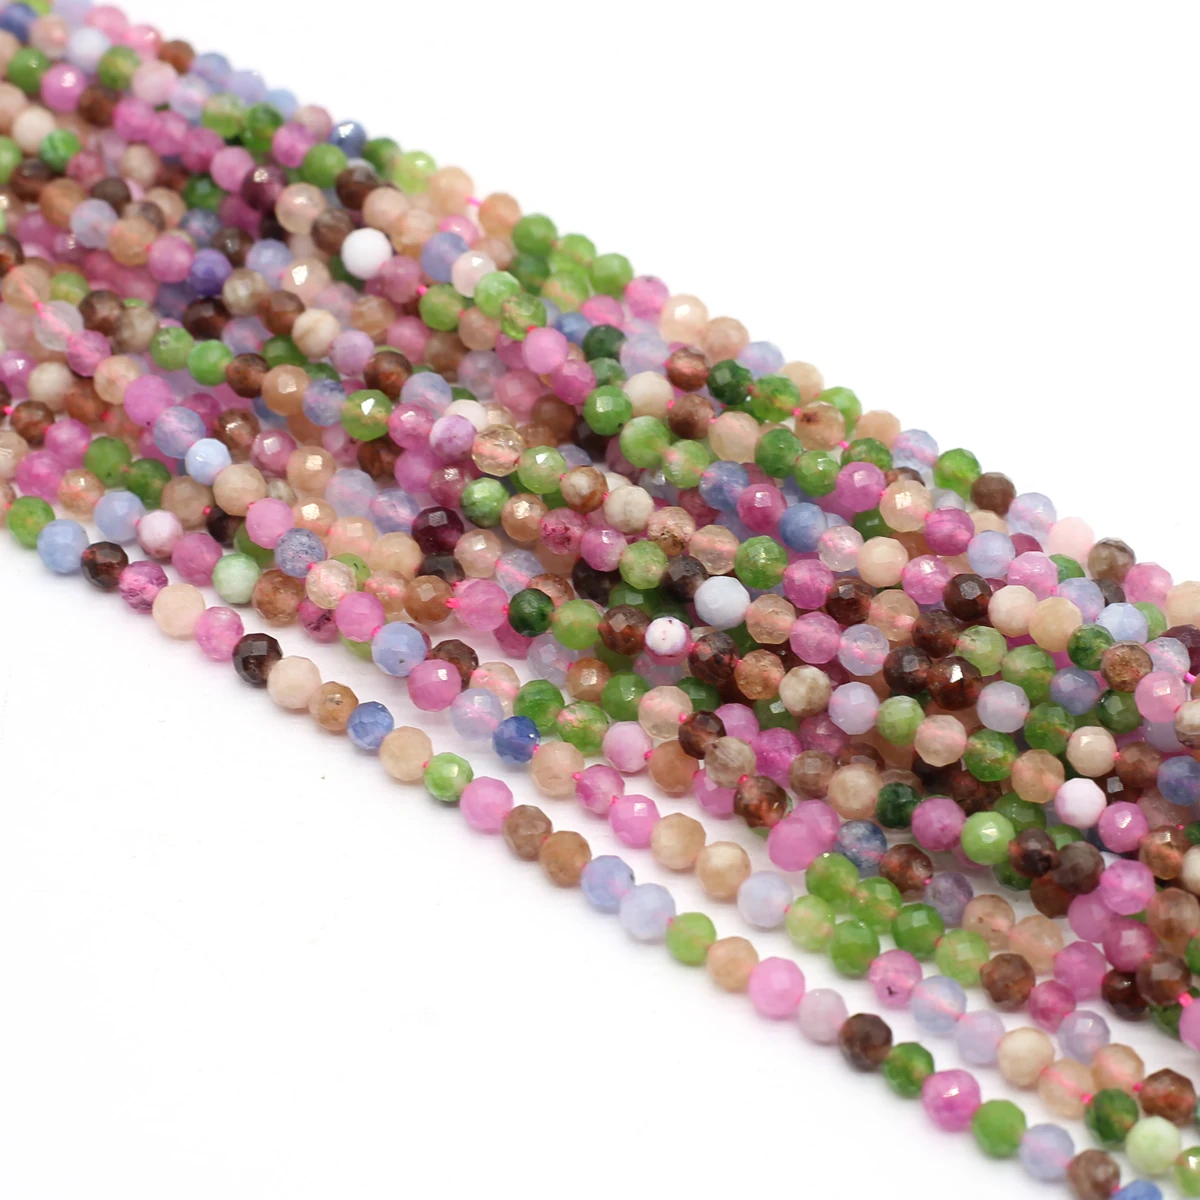 Купи 4mm Multicolor Tourmaline Beads Faceted Natural Round Stones Loose Spacer Beads for Jewelry Making DIY Bracelet Accessories GIft за 251 рублей в магазине AliExpress